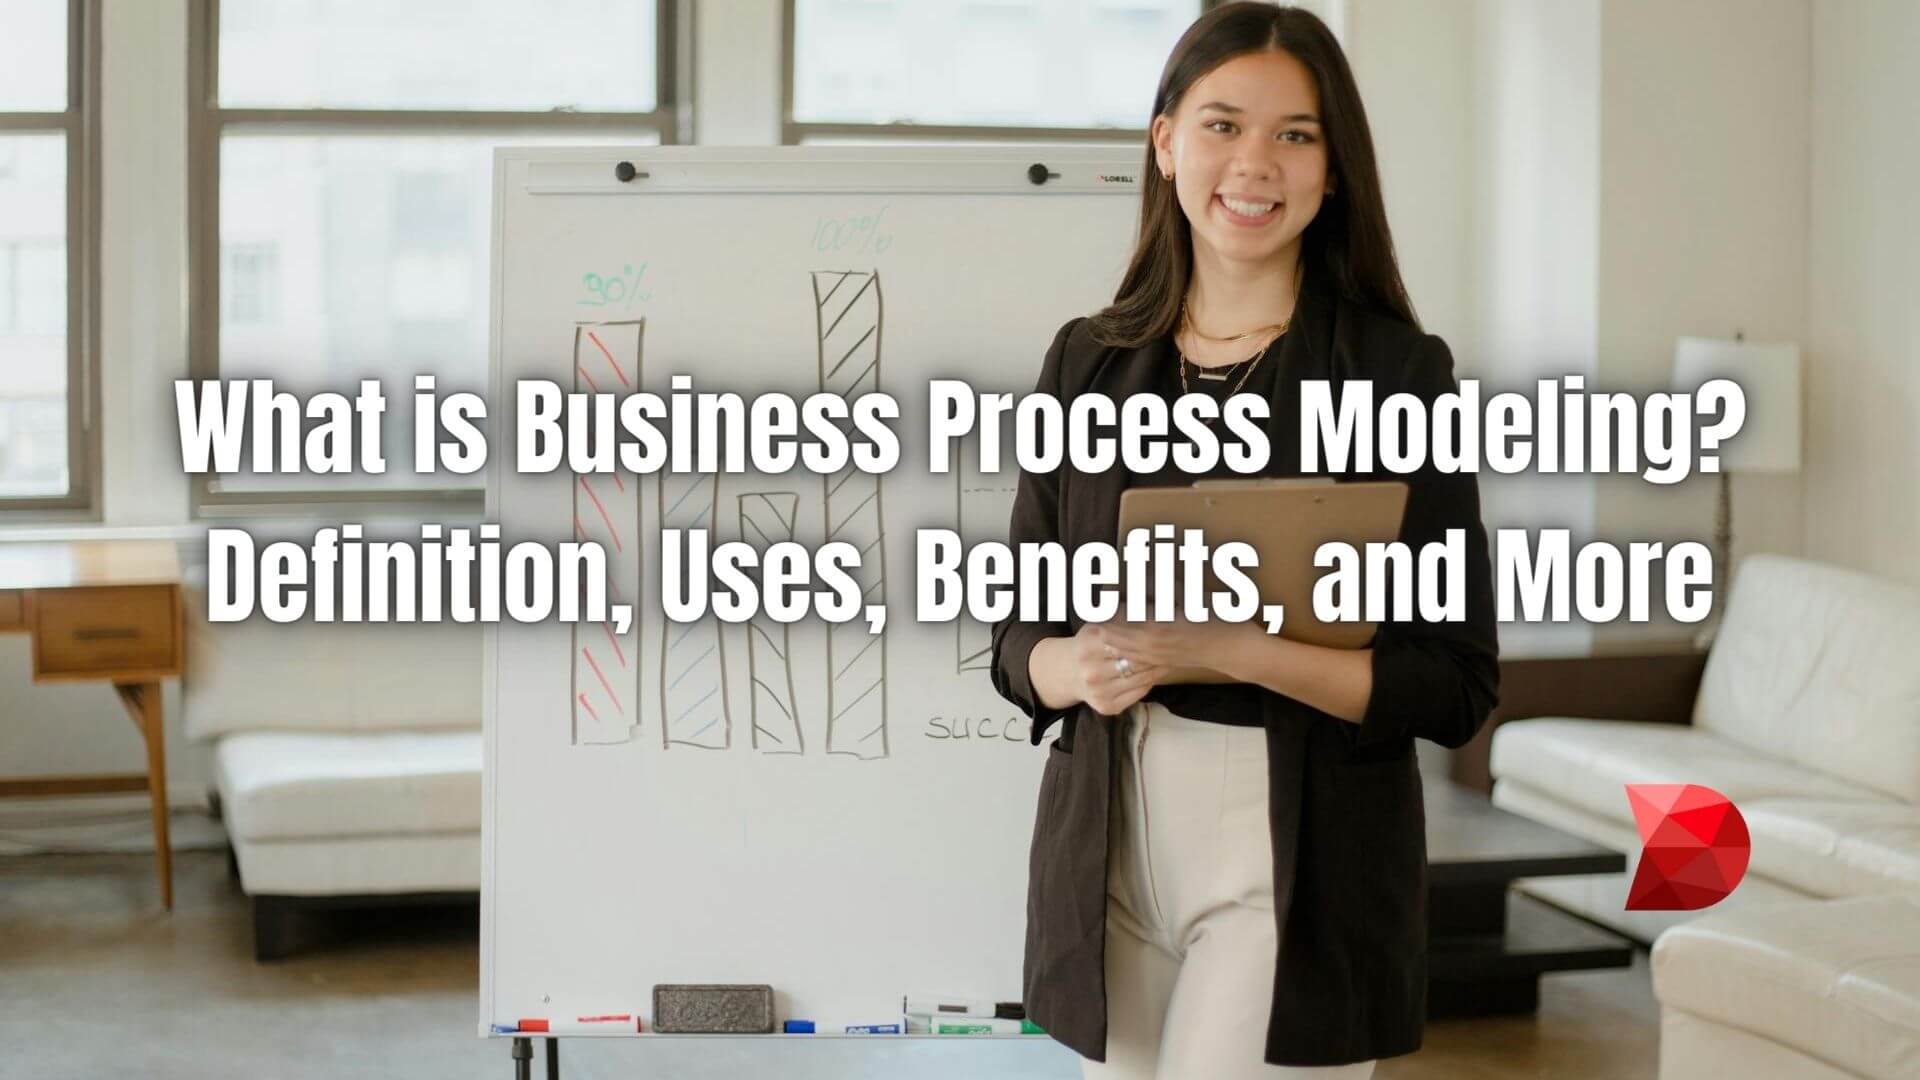 Optimize your business operations with our guide to business process modeling! Learn its definition, uses, benefits, and more for success.